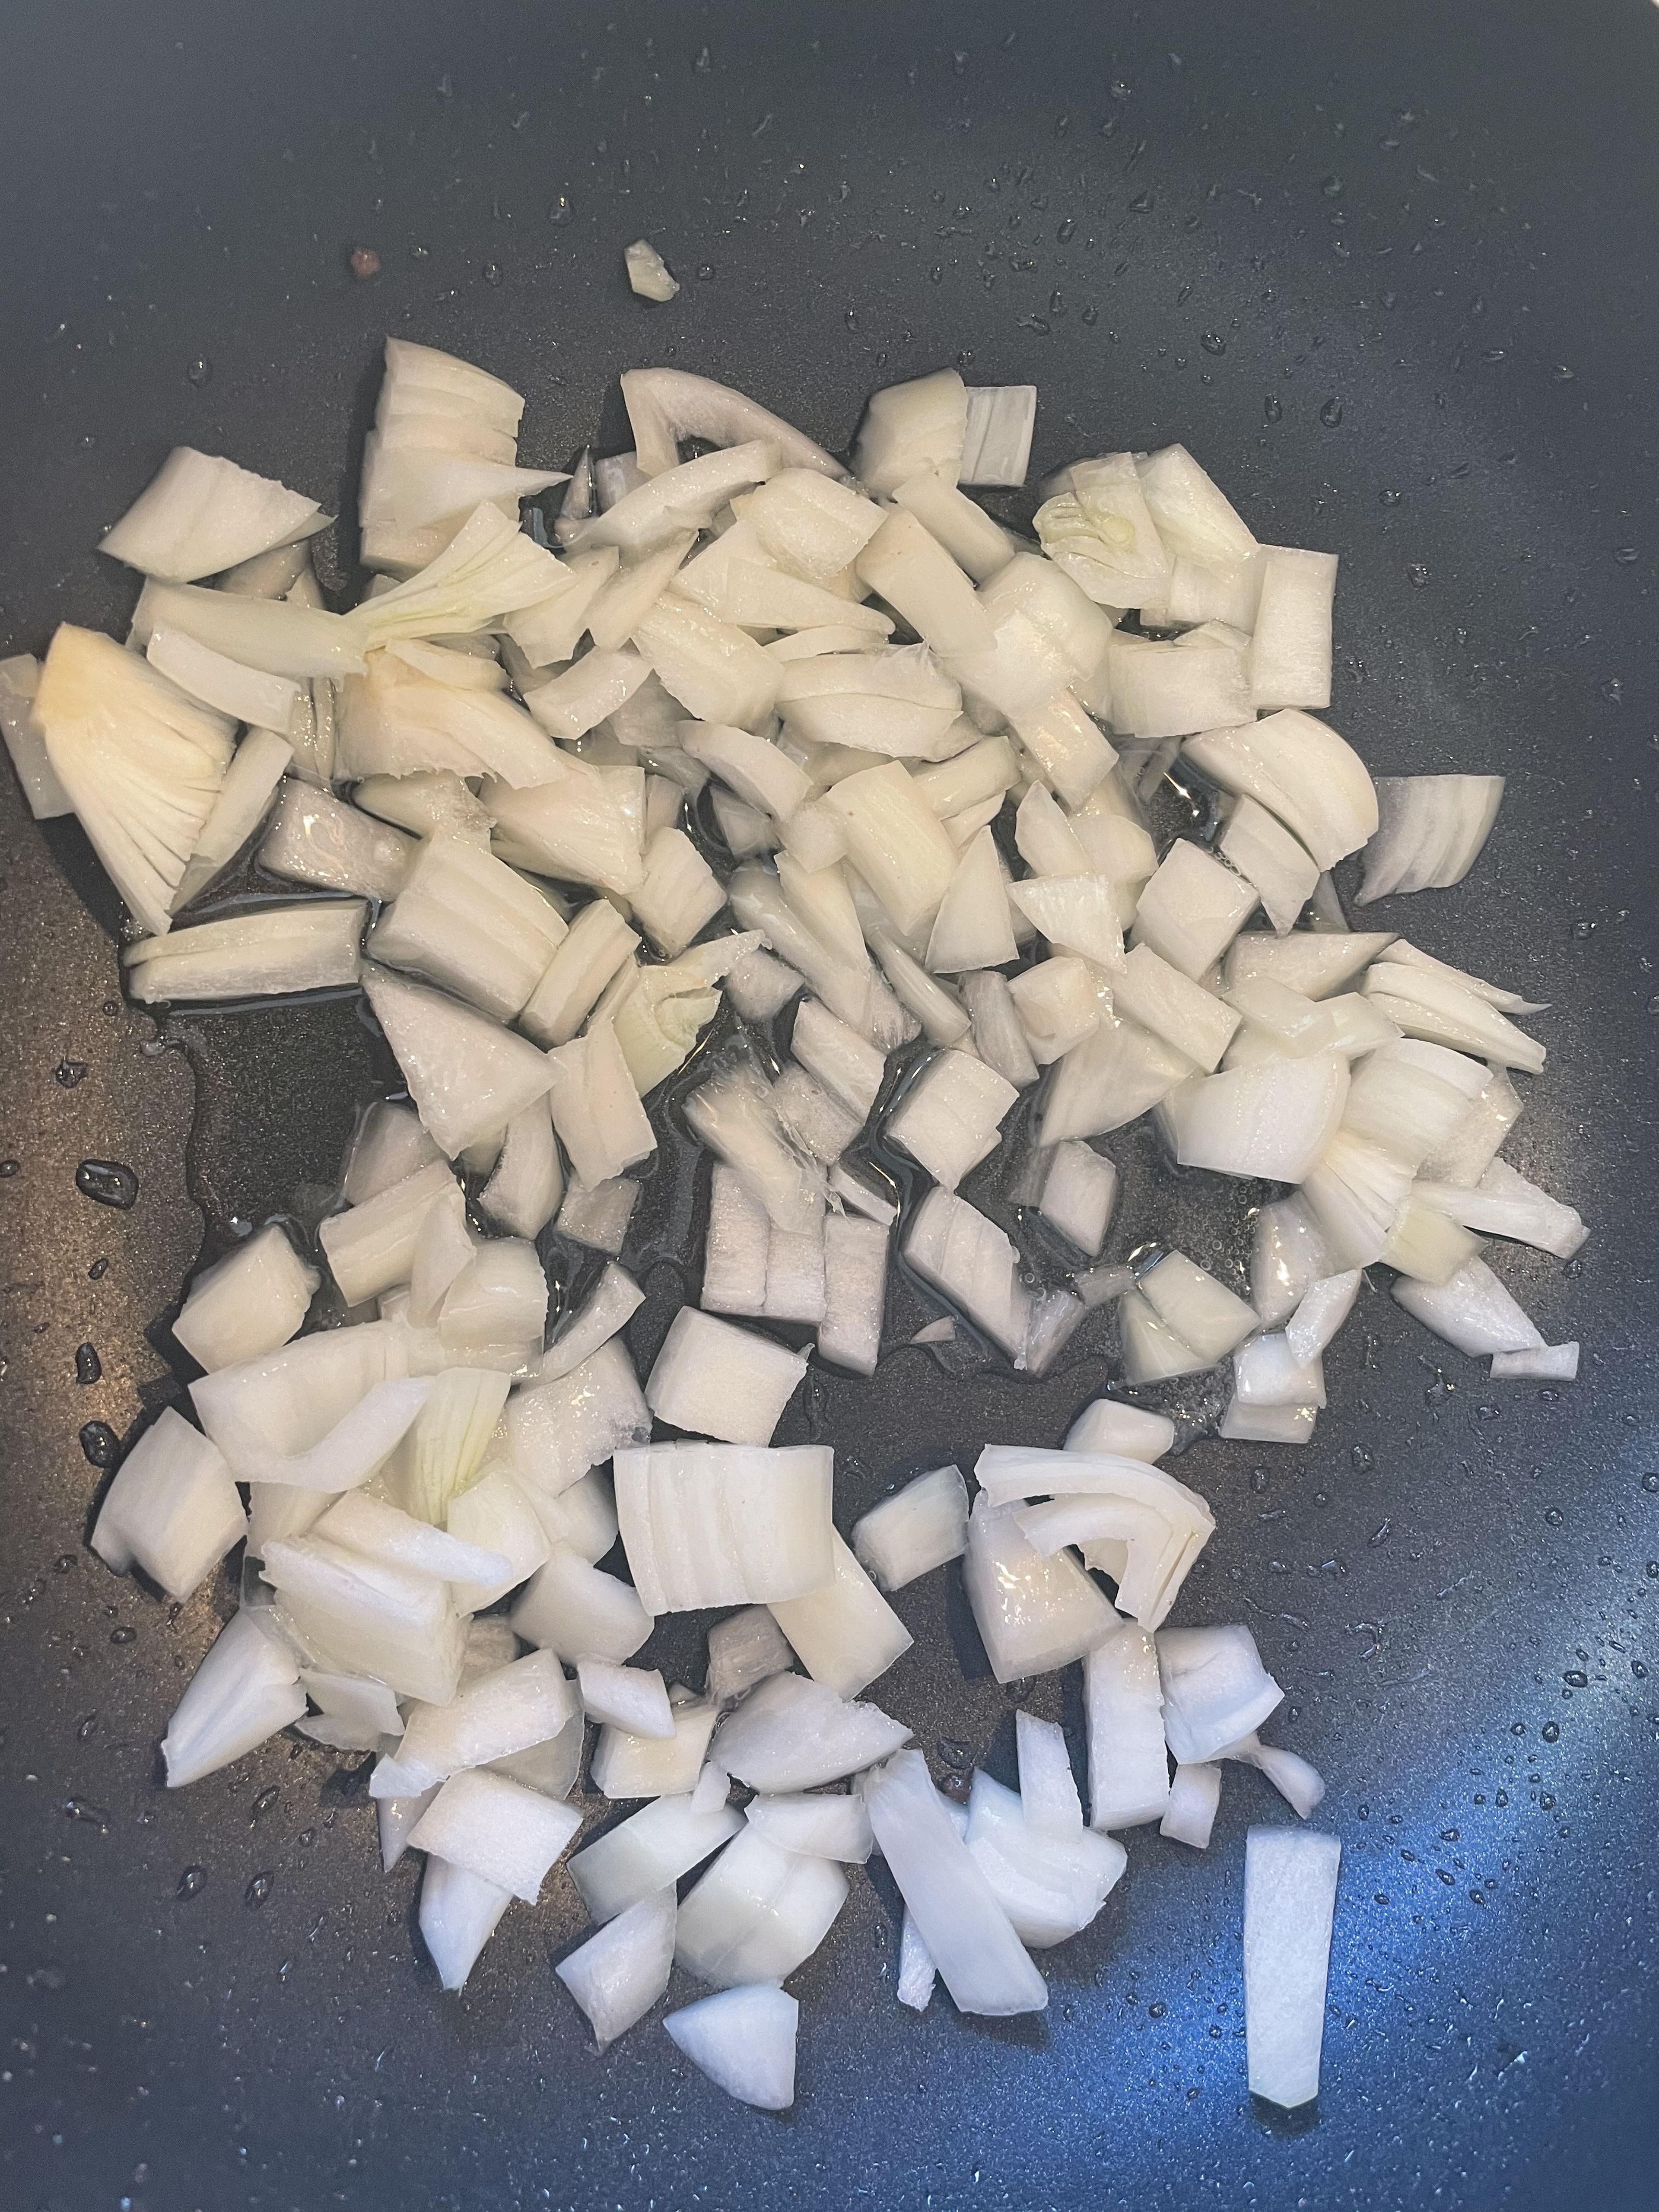 Once you have done the mince, chop your onion into dice or how ever you like, add some olive oil to the frying pan and fry your onions until transparent not browned. 